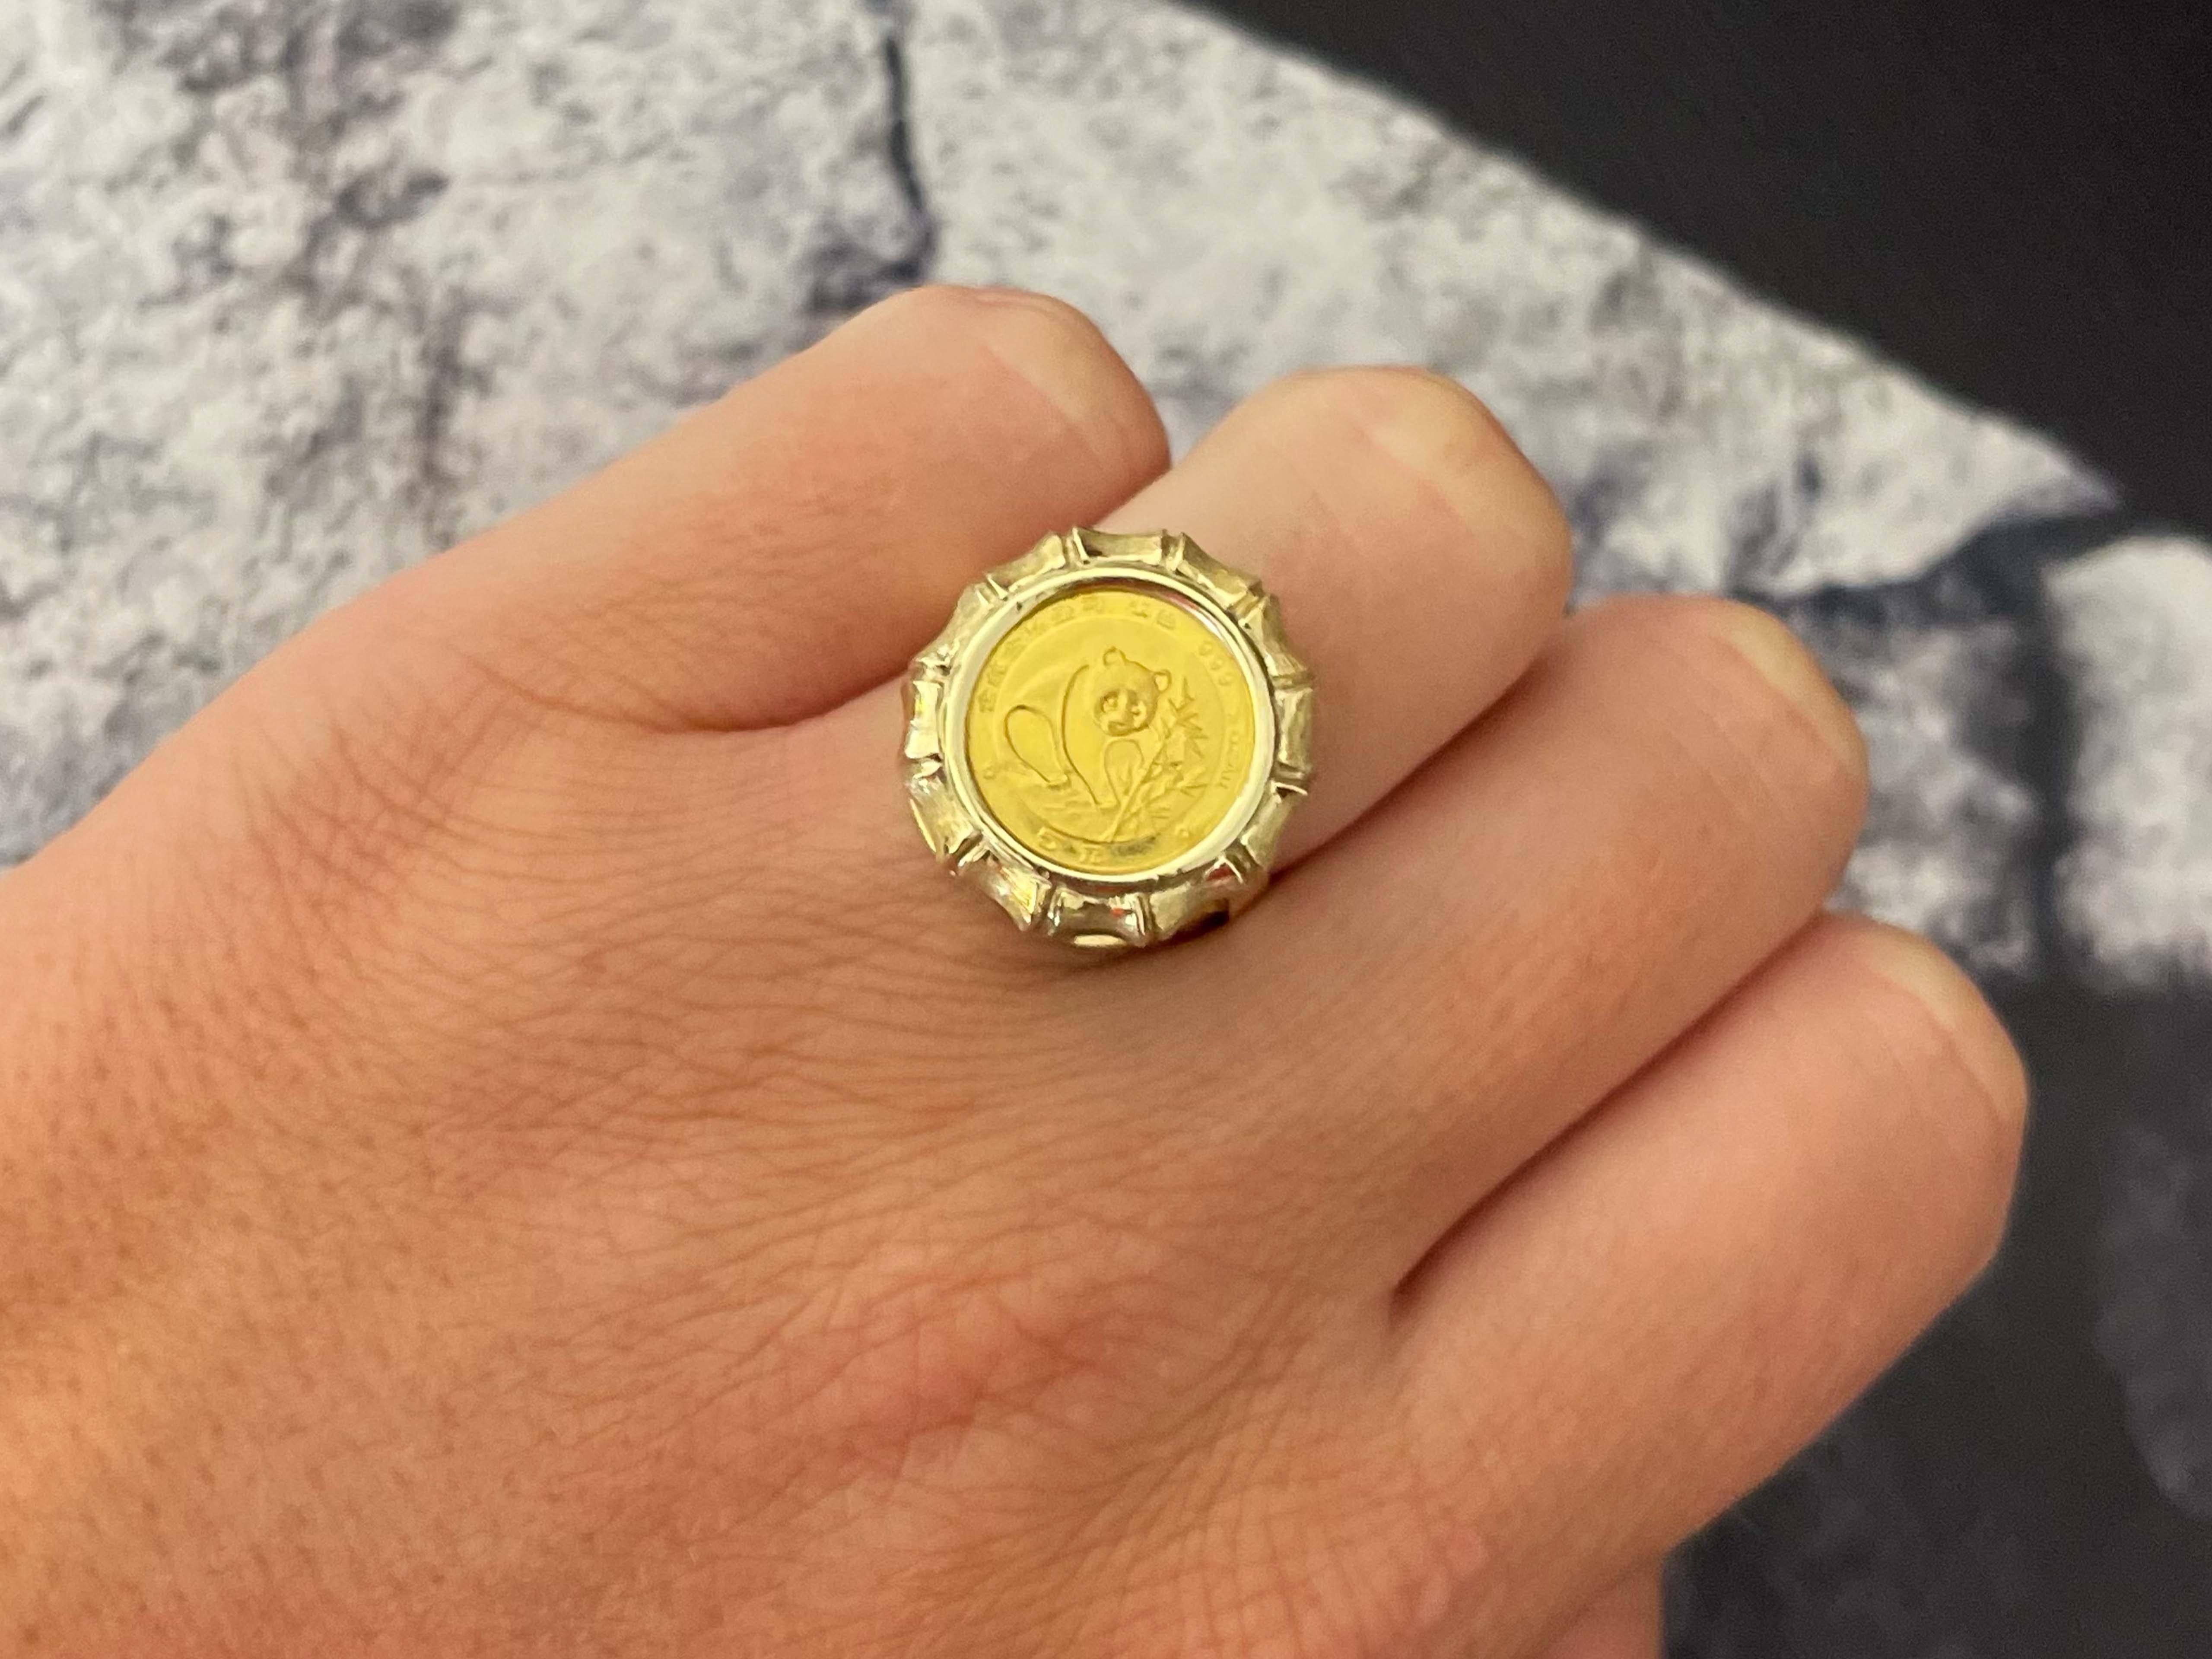 Ring Specifications:
​
​Metal: 14K Yellow Gold

Ring Size: 6.75

Total Weight: 6.4 Grams 

Gold Coin: 1/20 oz 24k

Gold Coin Purity: 99.99%

Condition: Preowned